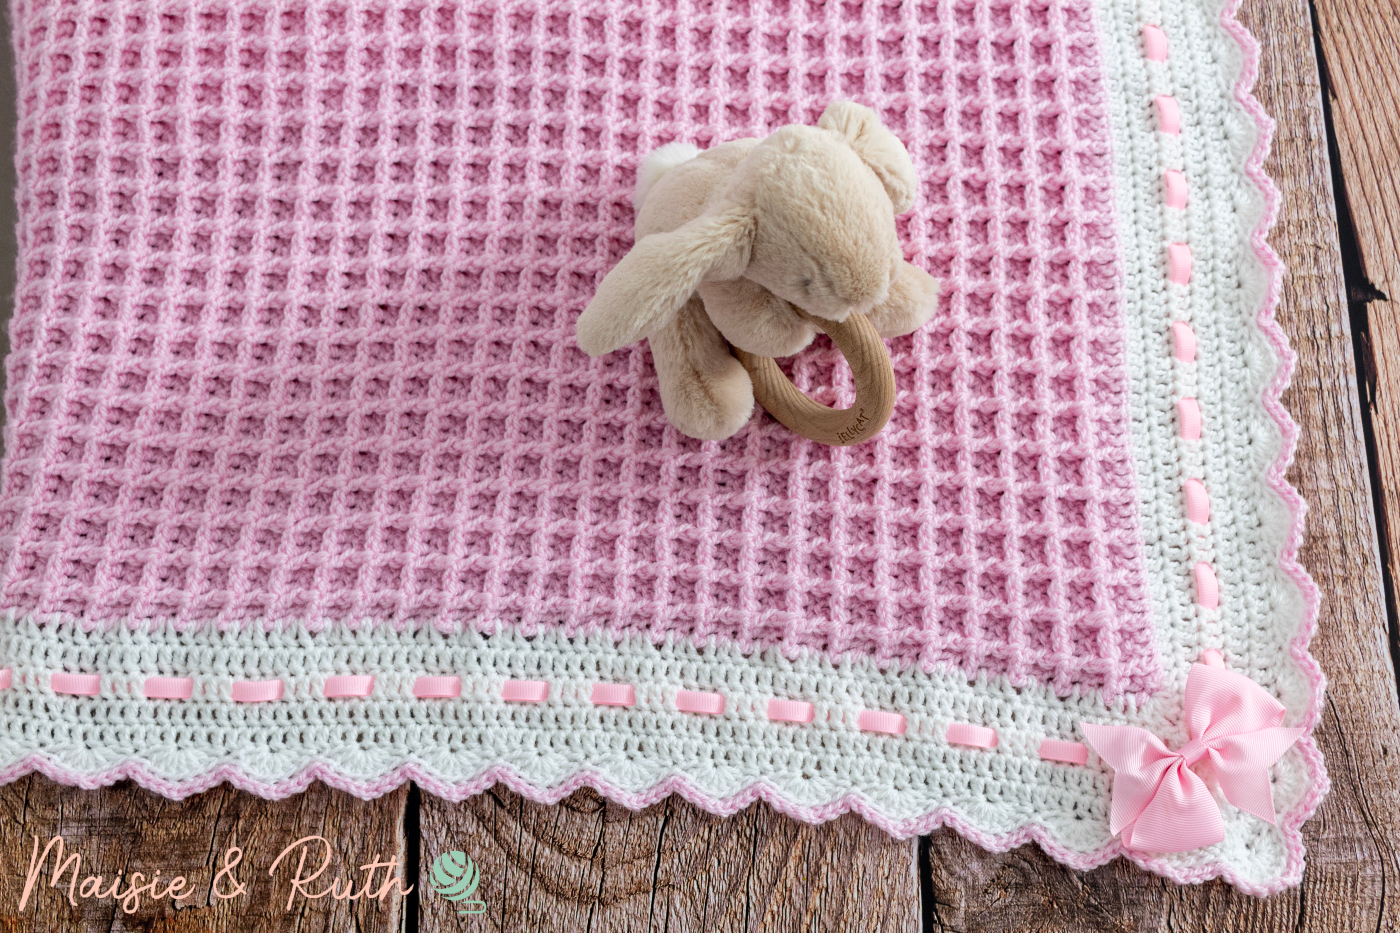 Crochet Waffle Stitch Baby Blanket On Wood with Bunny